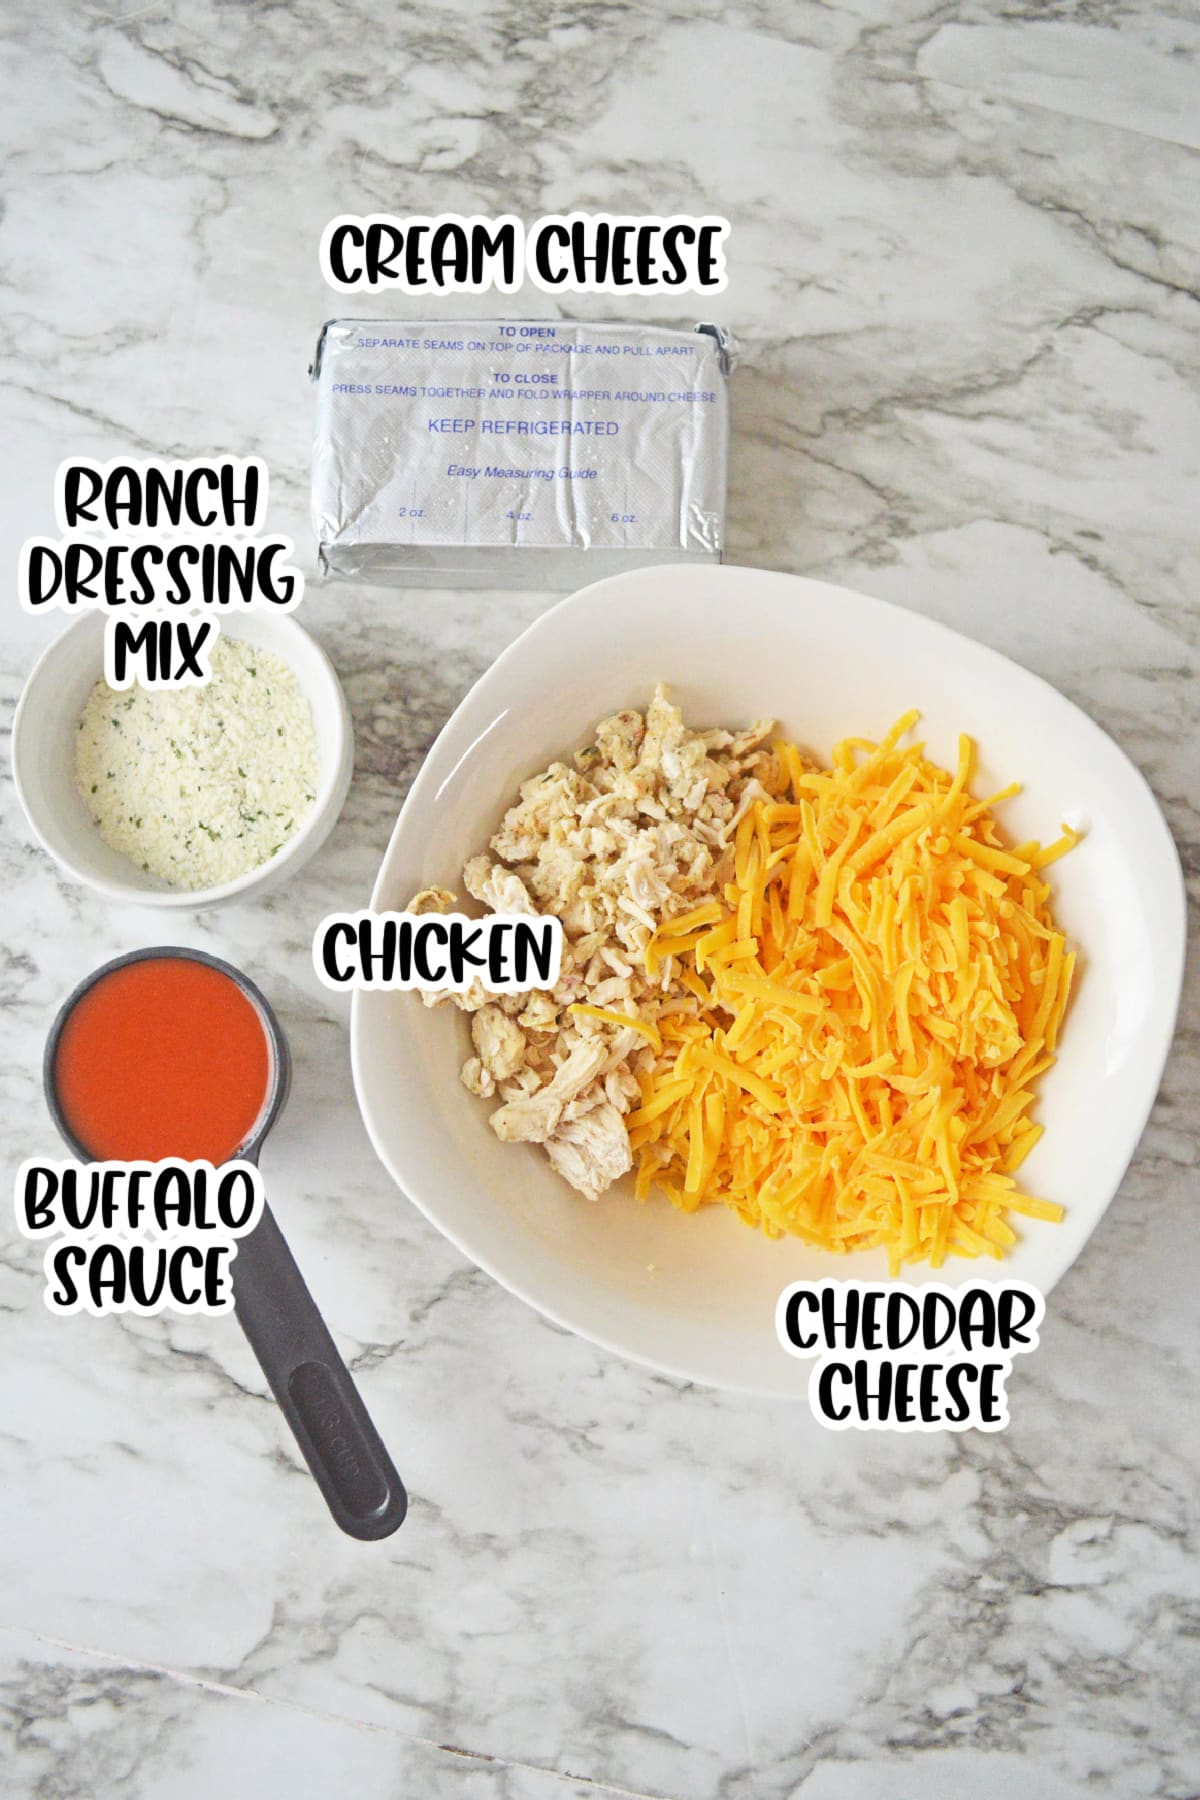 Ingredients for cold buffalo chicken dip